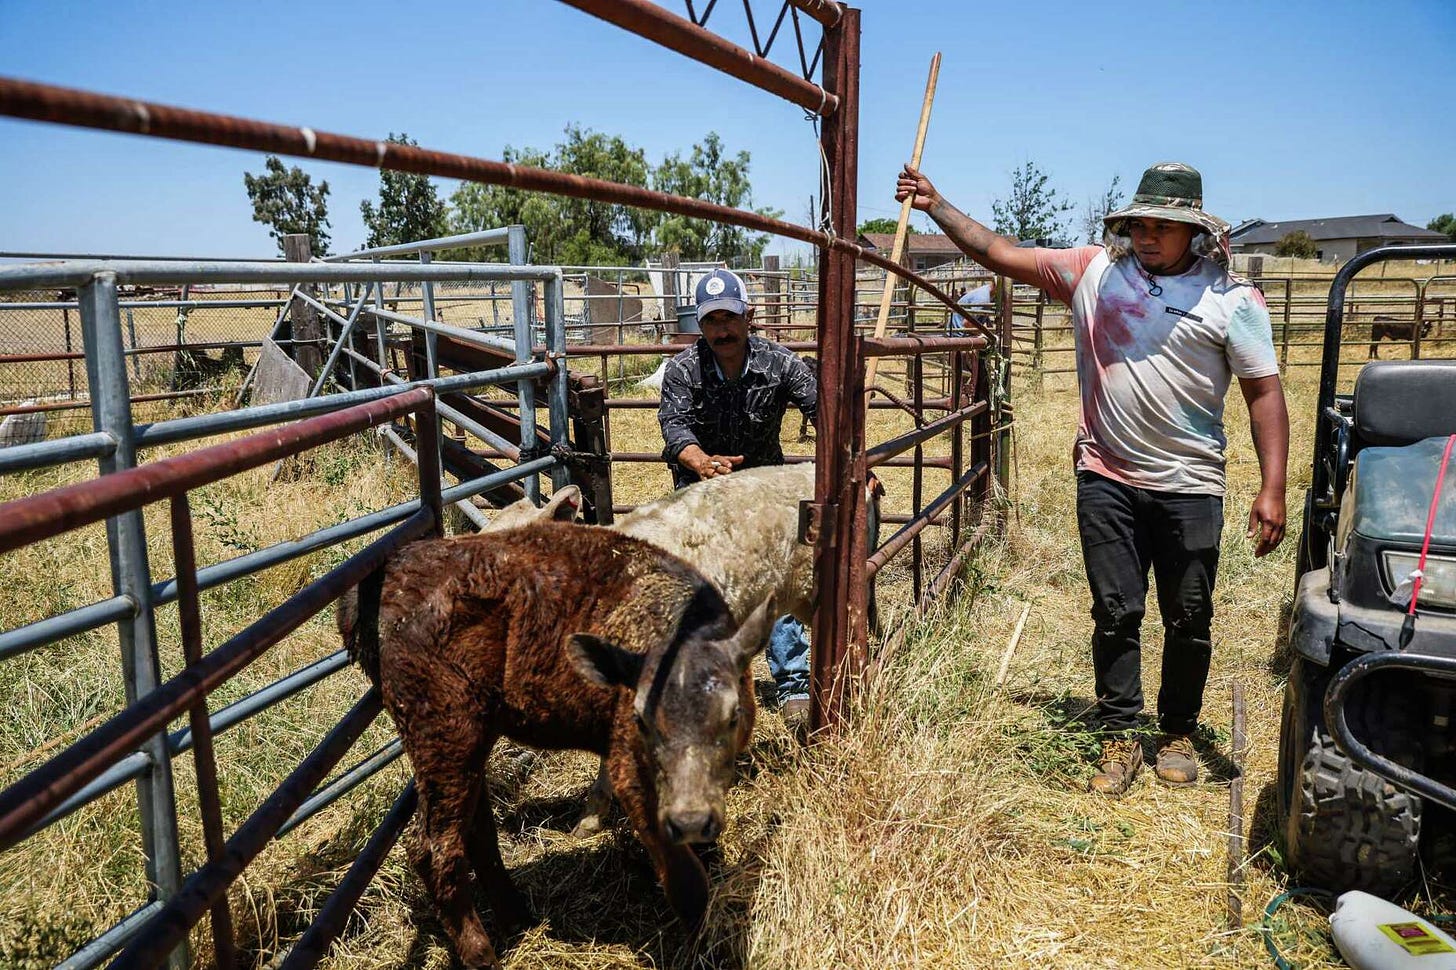 Melvin Lopez, a former San Francisco drug dealer from Honduras, works with another man on a farm vaccinating cows on Jersey Island in Contra Costa County.